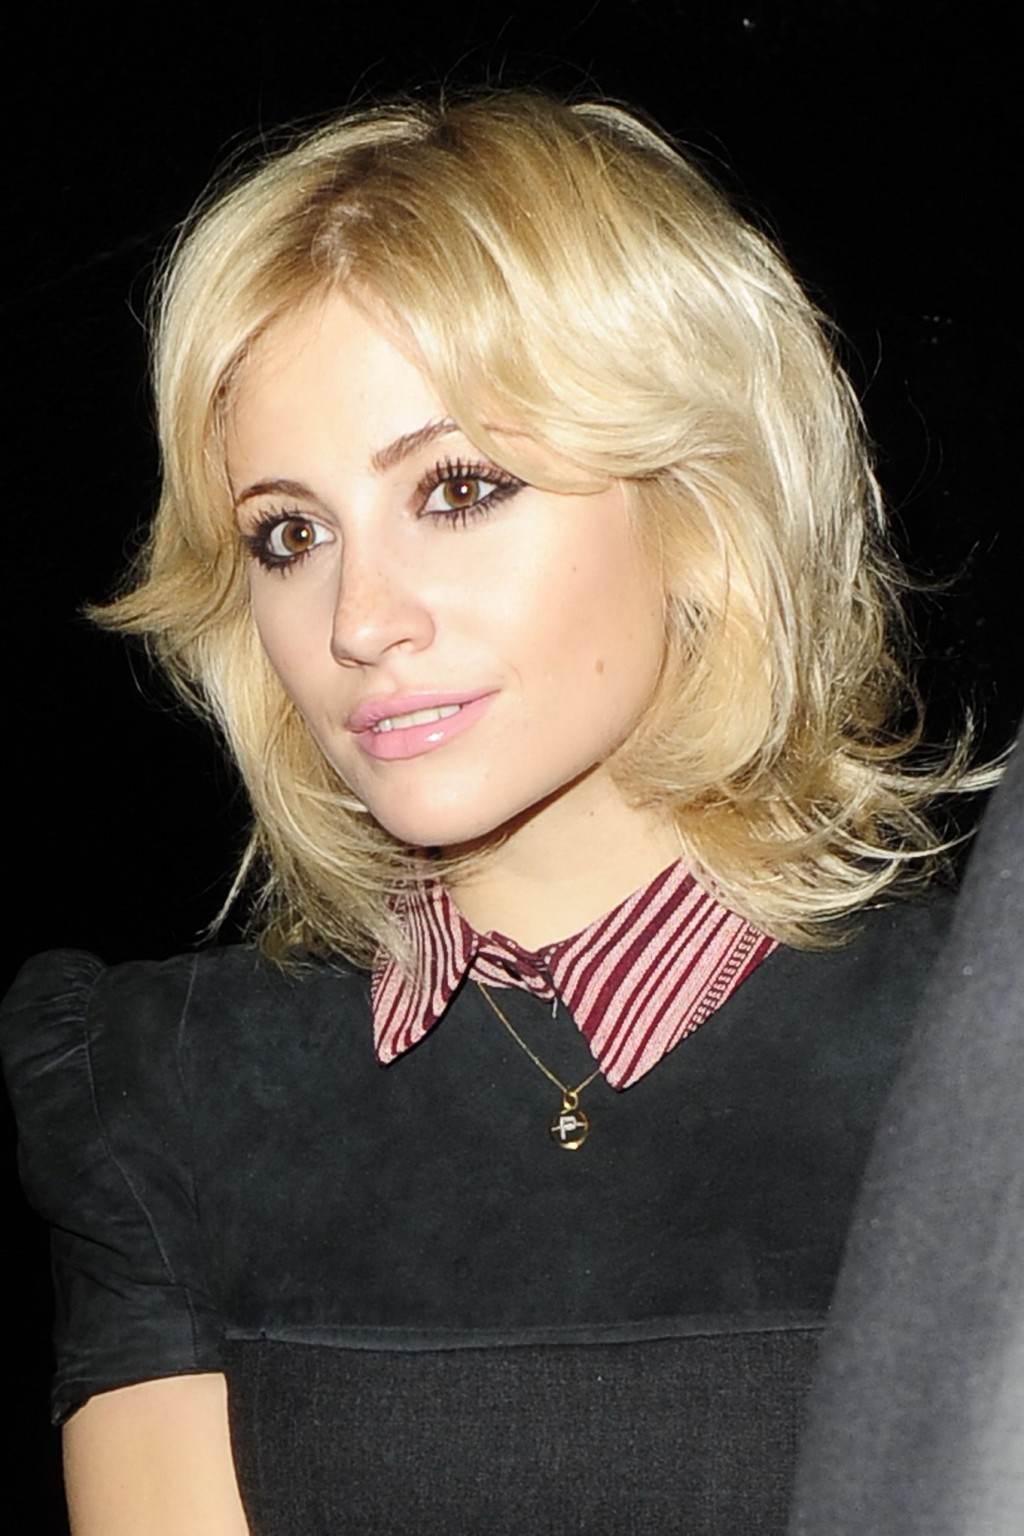 Pixie Lott flashing her panties outside the Rose Club in London #75265474